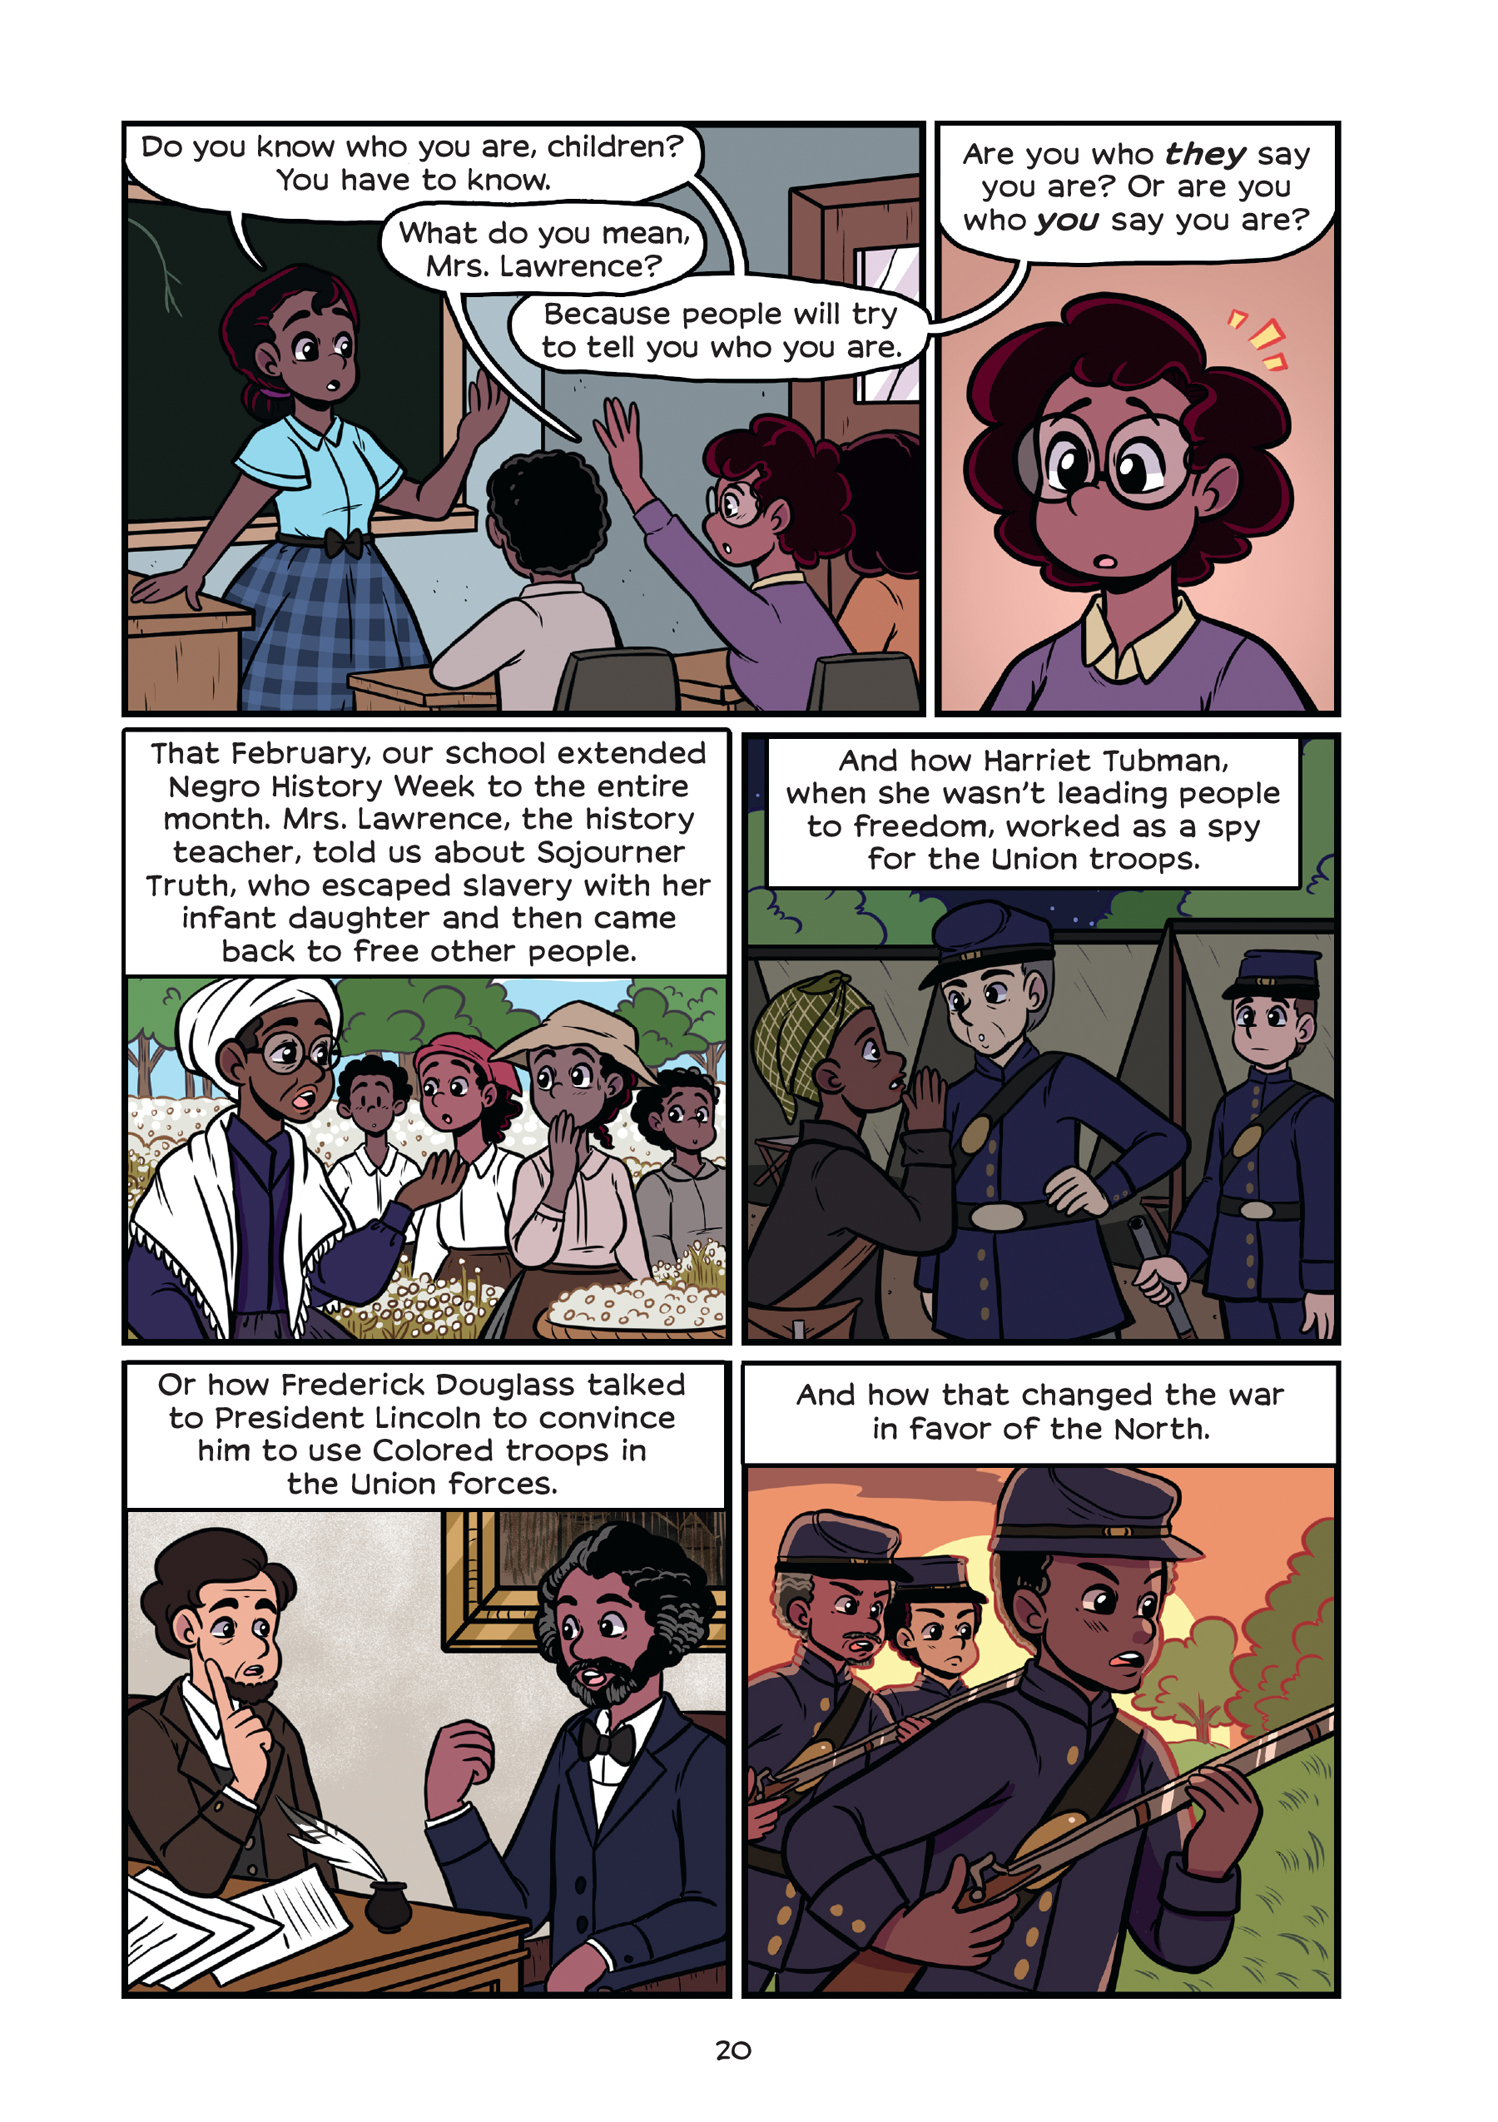 Read online History Comics comic -  Issue # Rosa Parks & Claudette Colvin - Civil Rights Heroes - 26